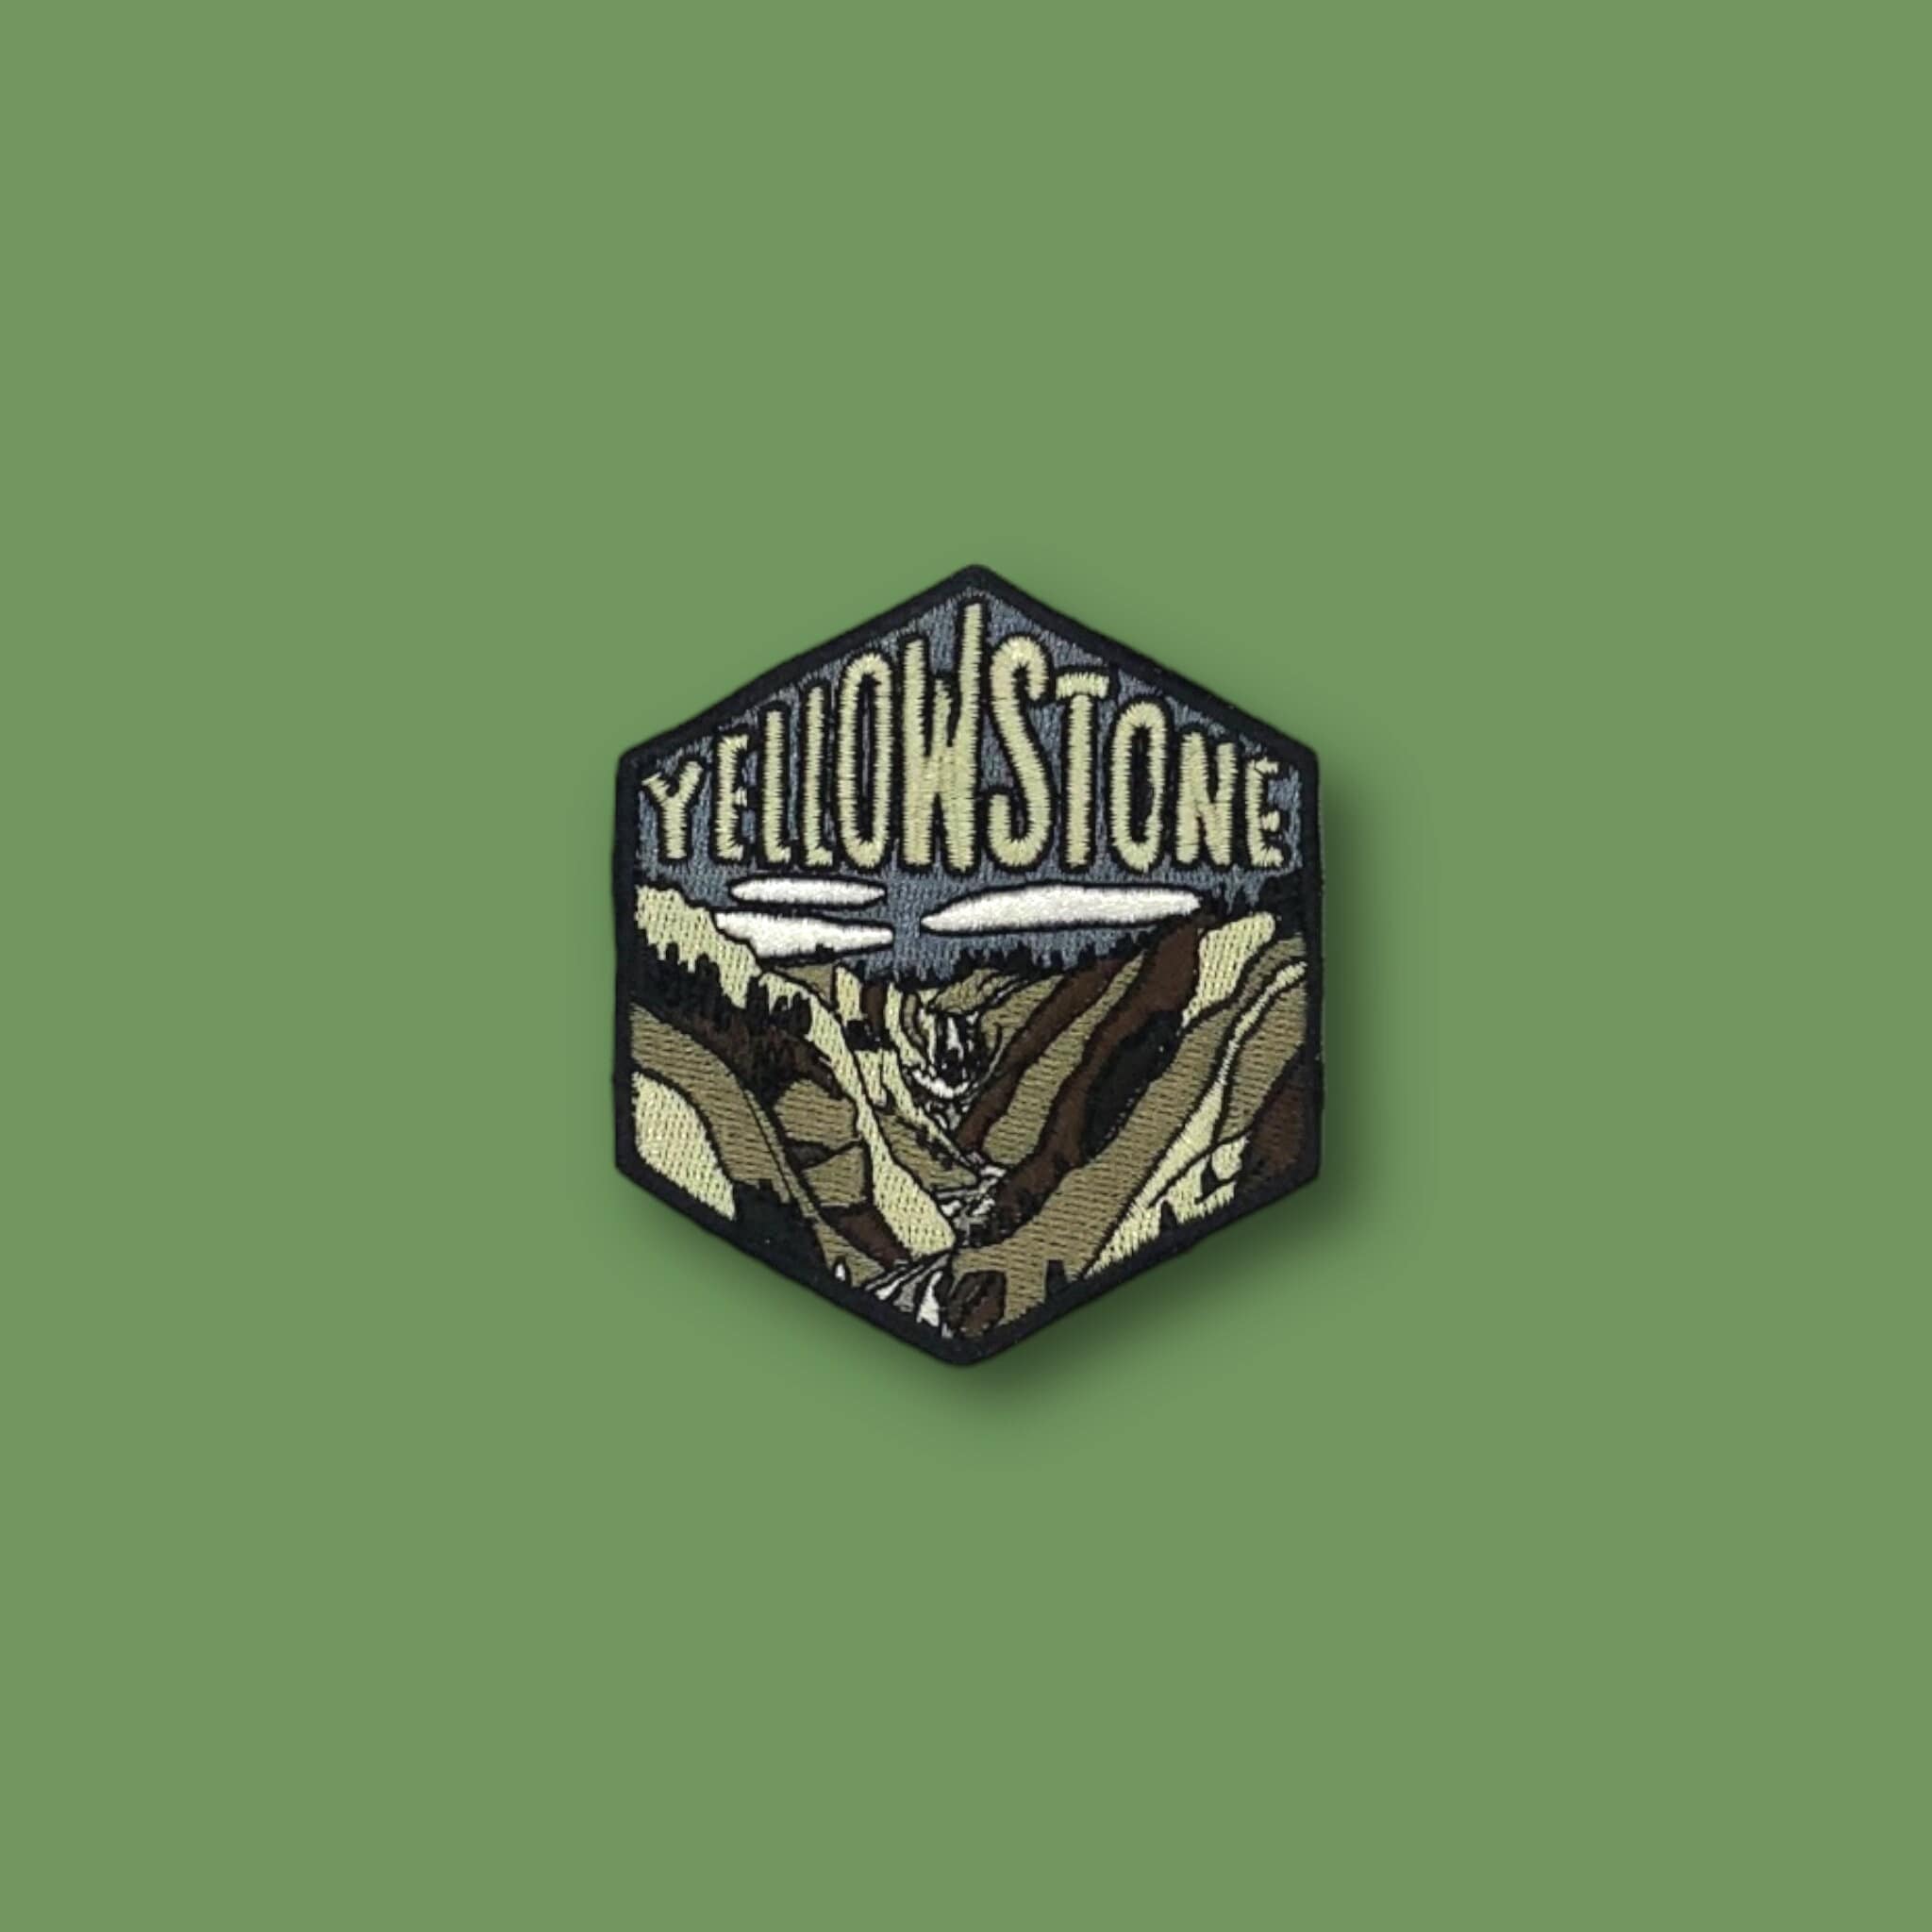 10 Best Yellowstone National Park Patches - National Parks Supply Co.